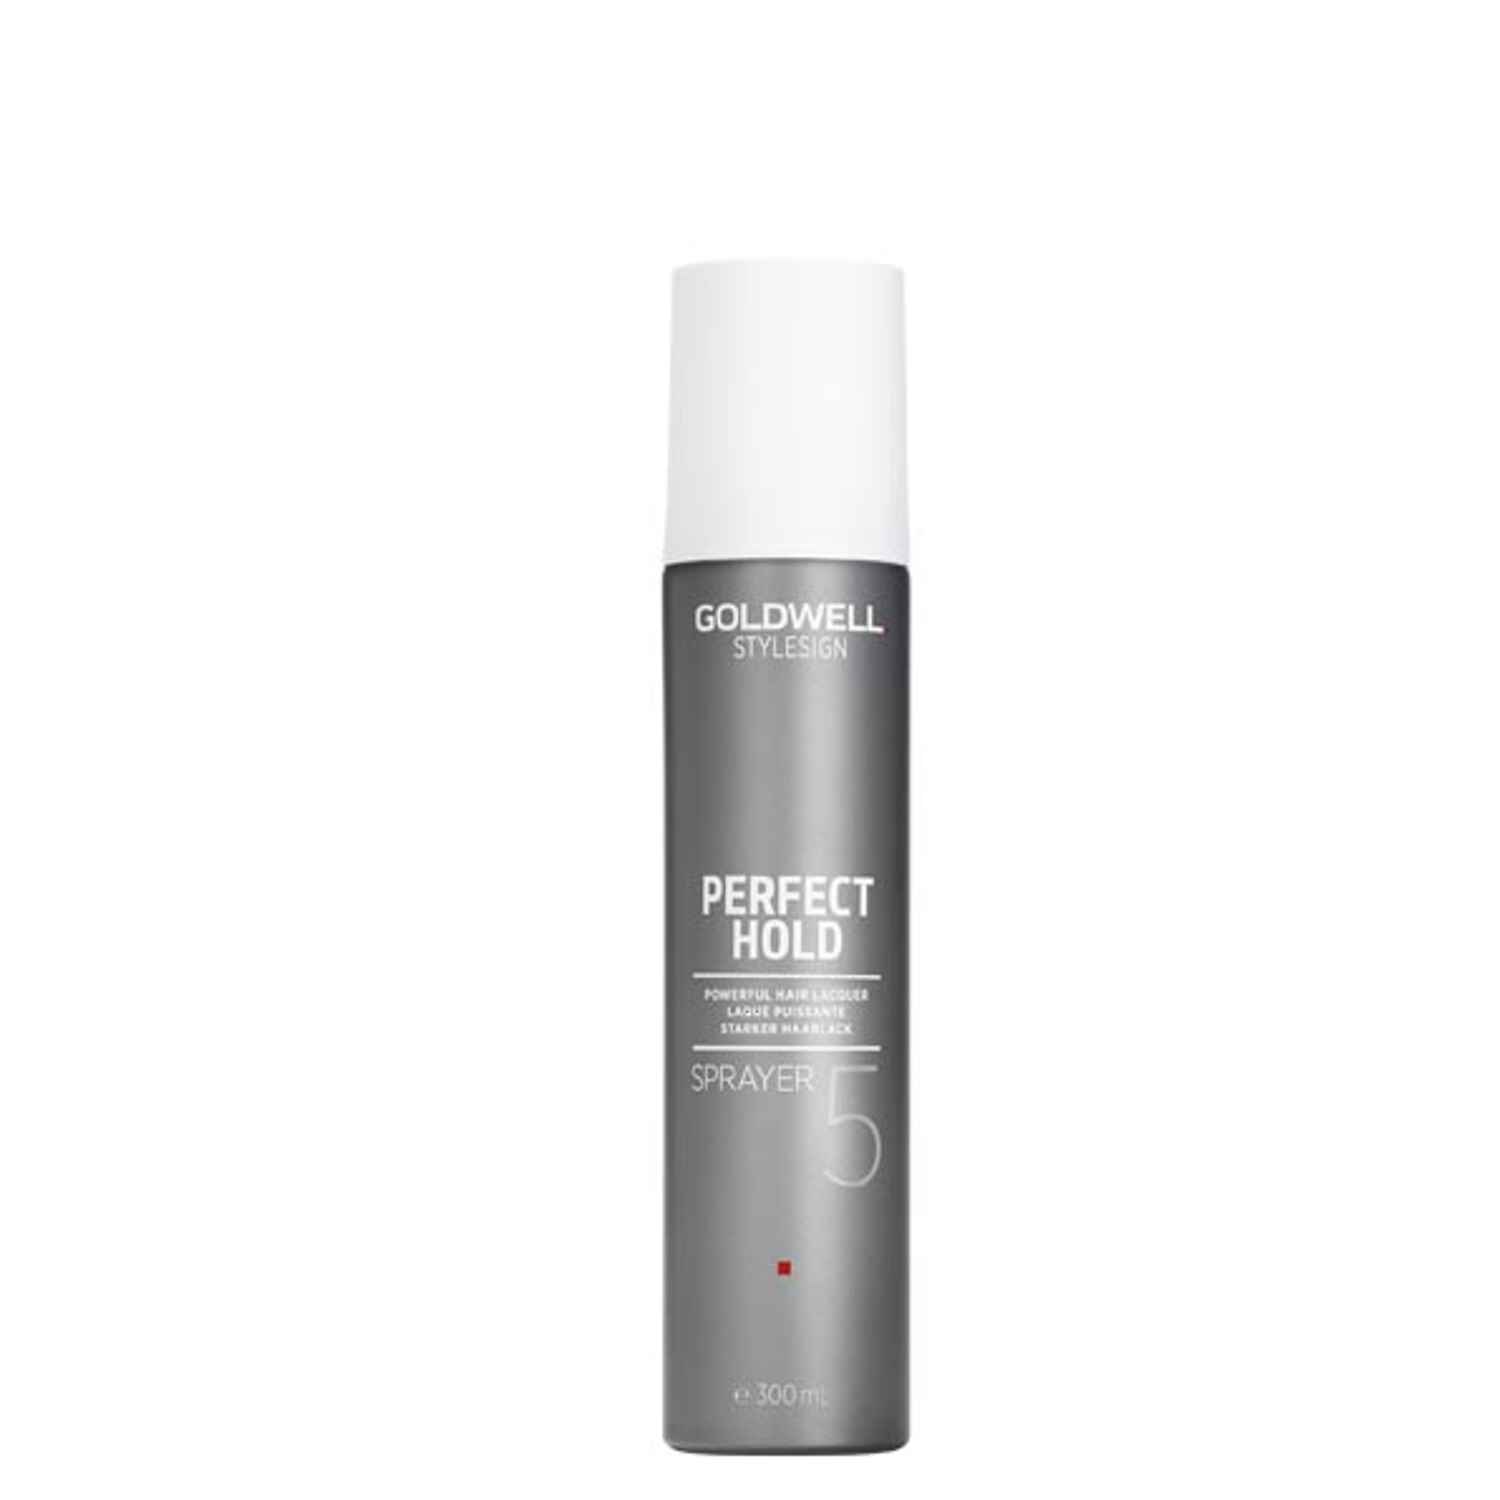 GOLDWELL Style Sign Perfect Hold SPRAYER 500 ml